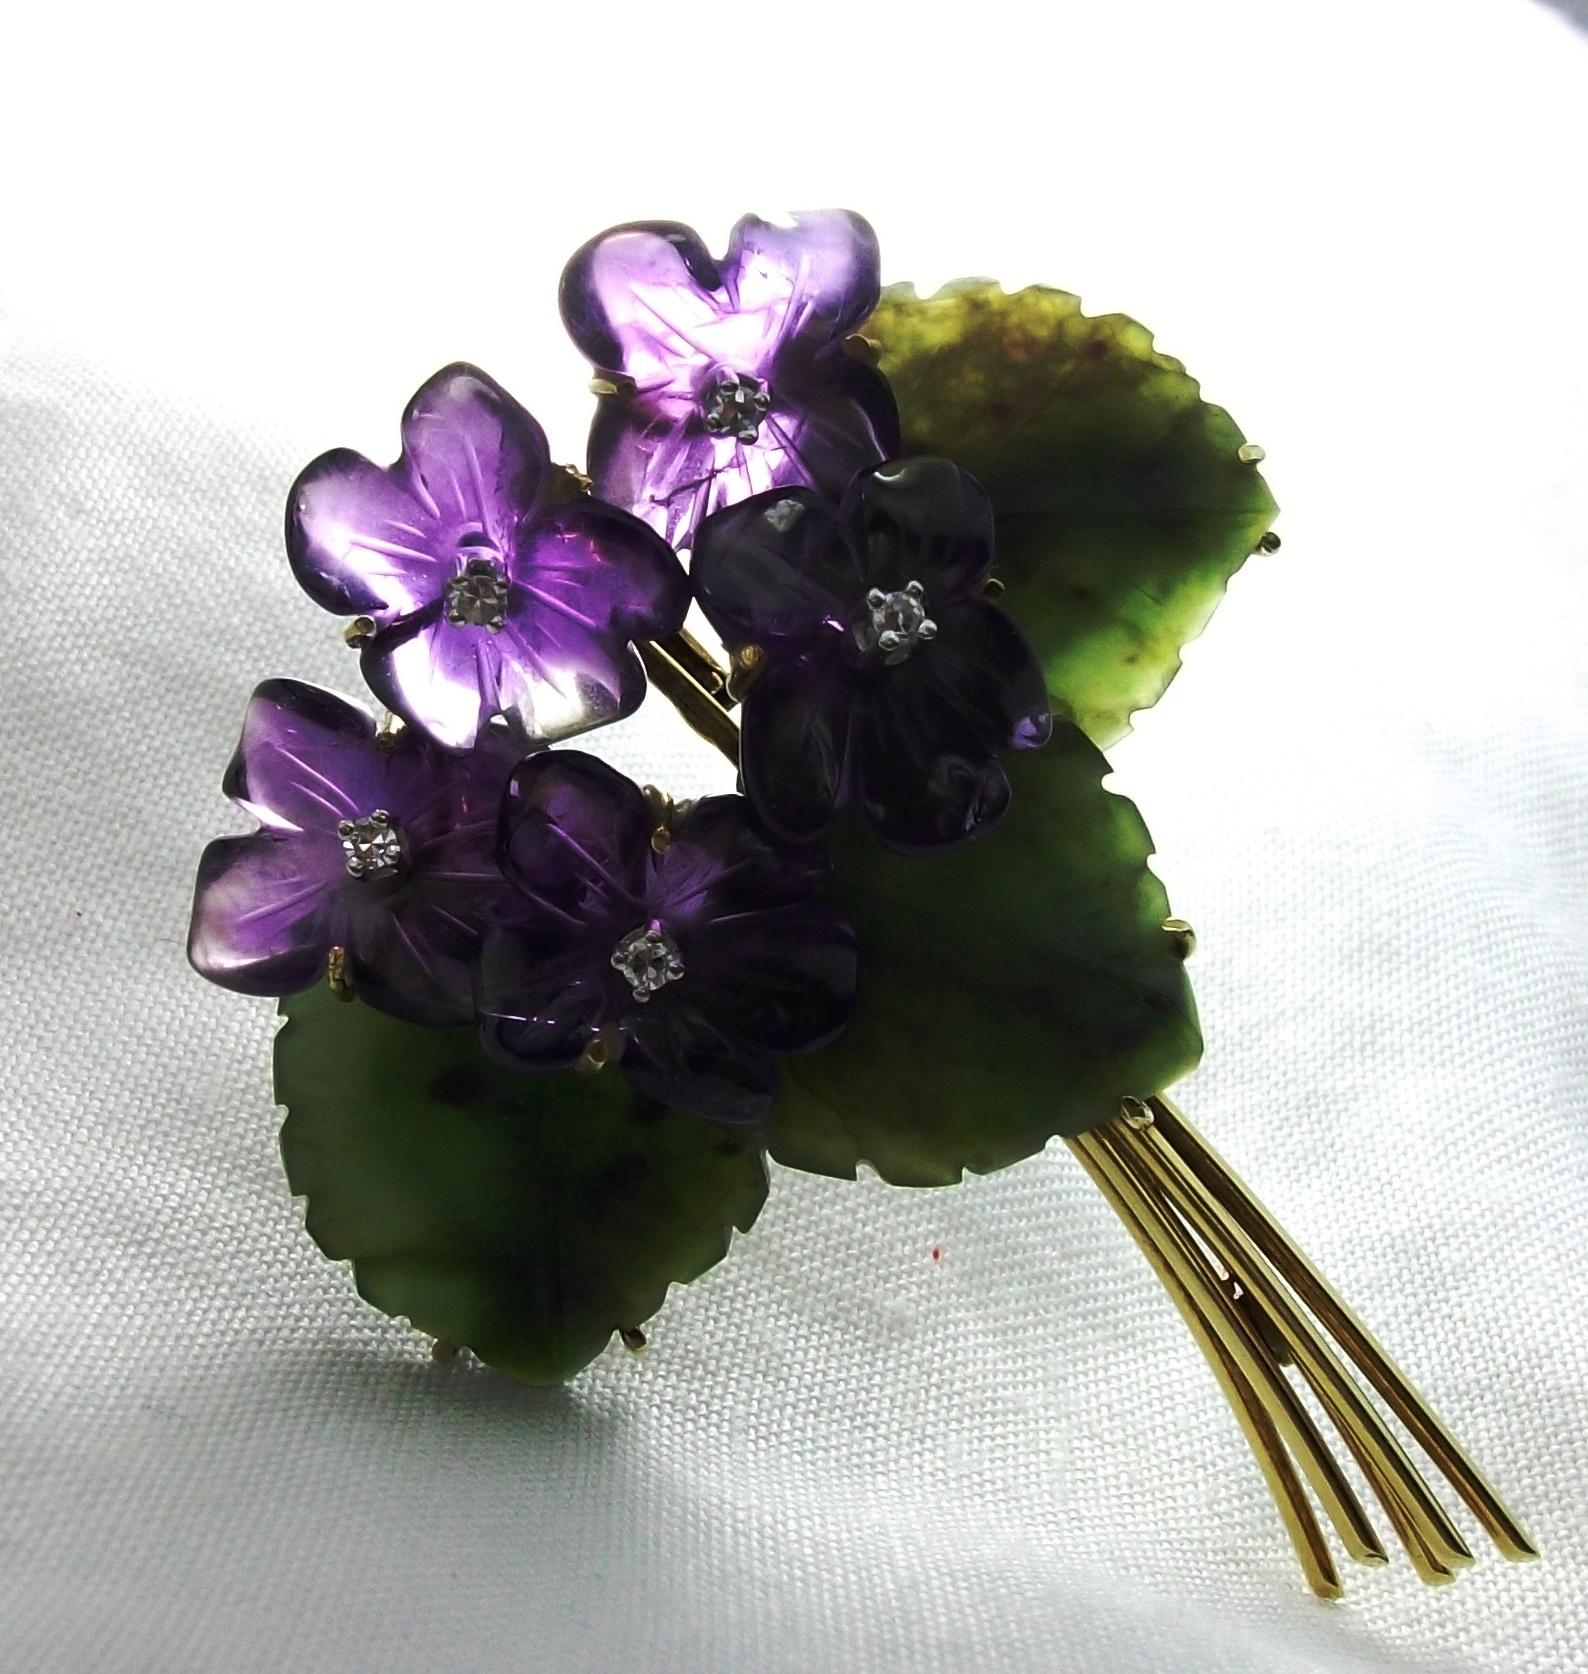 This is a more than wonderful 14k gold mounted brooch in a shape of a romantic and sweet bouquet of violets,  entirely handmade. Violets are made of amethyst with  diamonds in each one. The leaves have shiny edges and are made of jade. This brooch